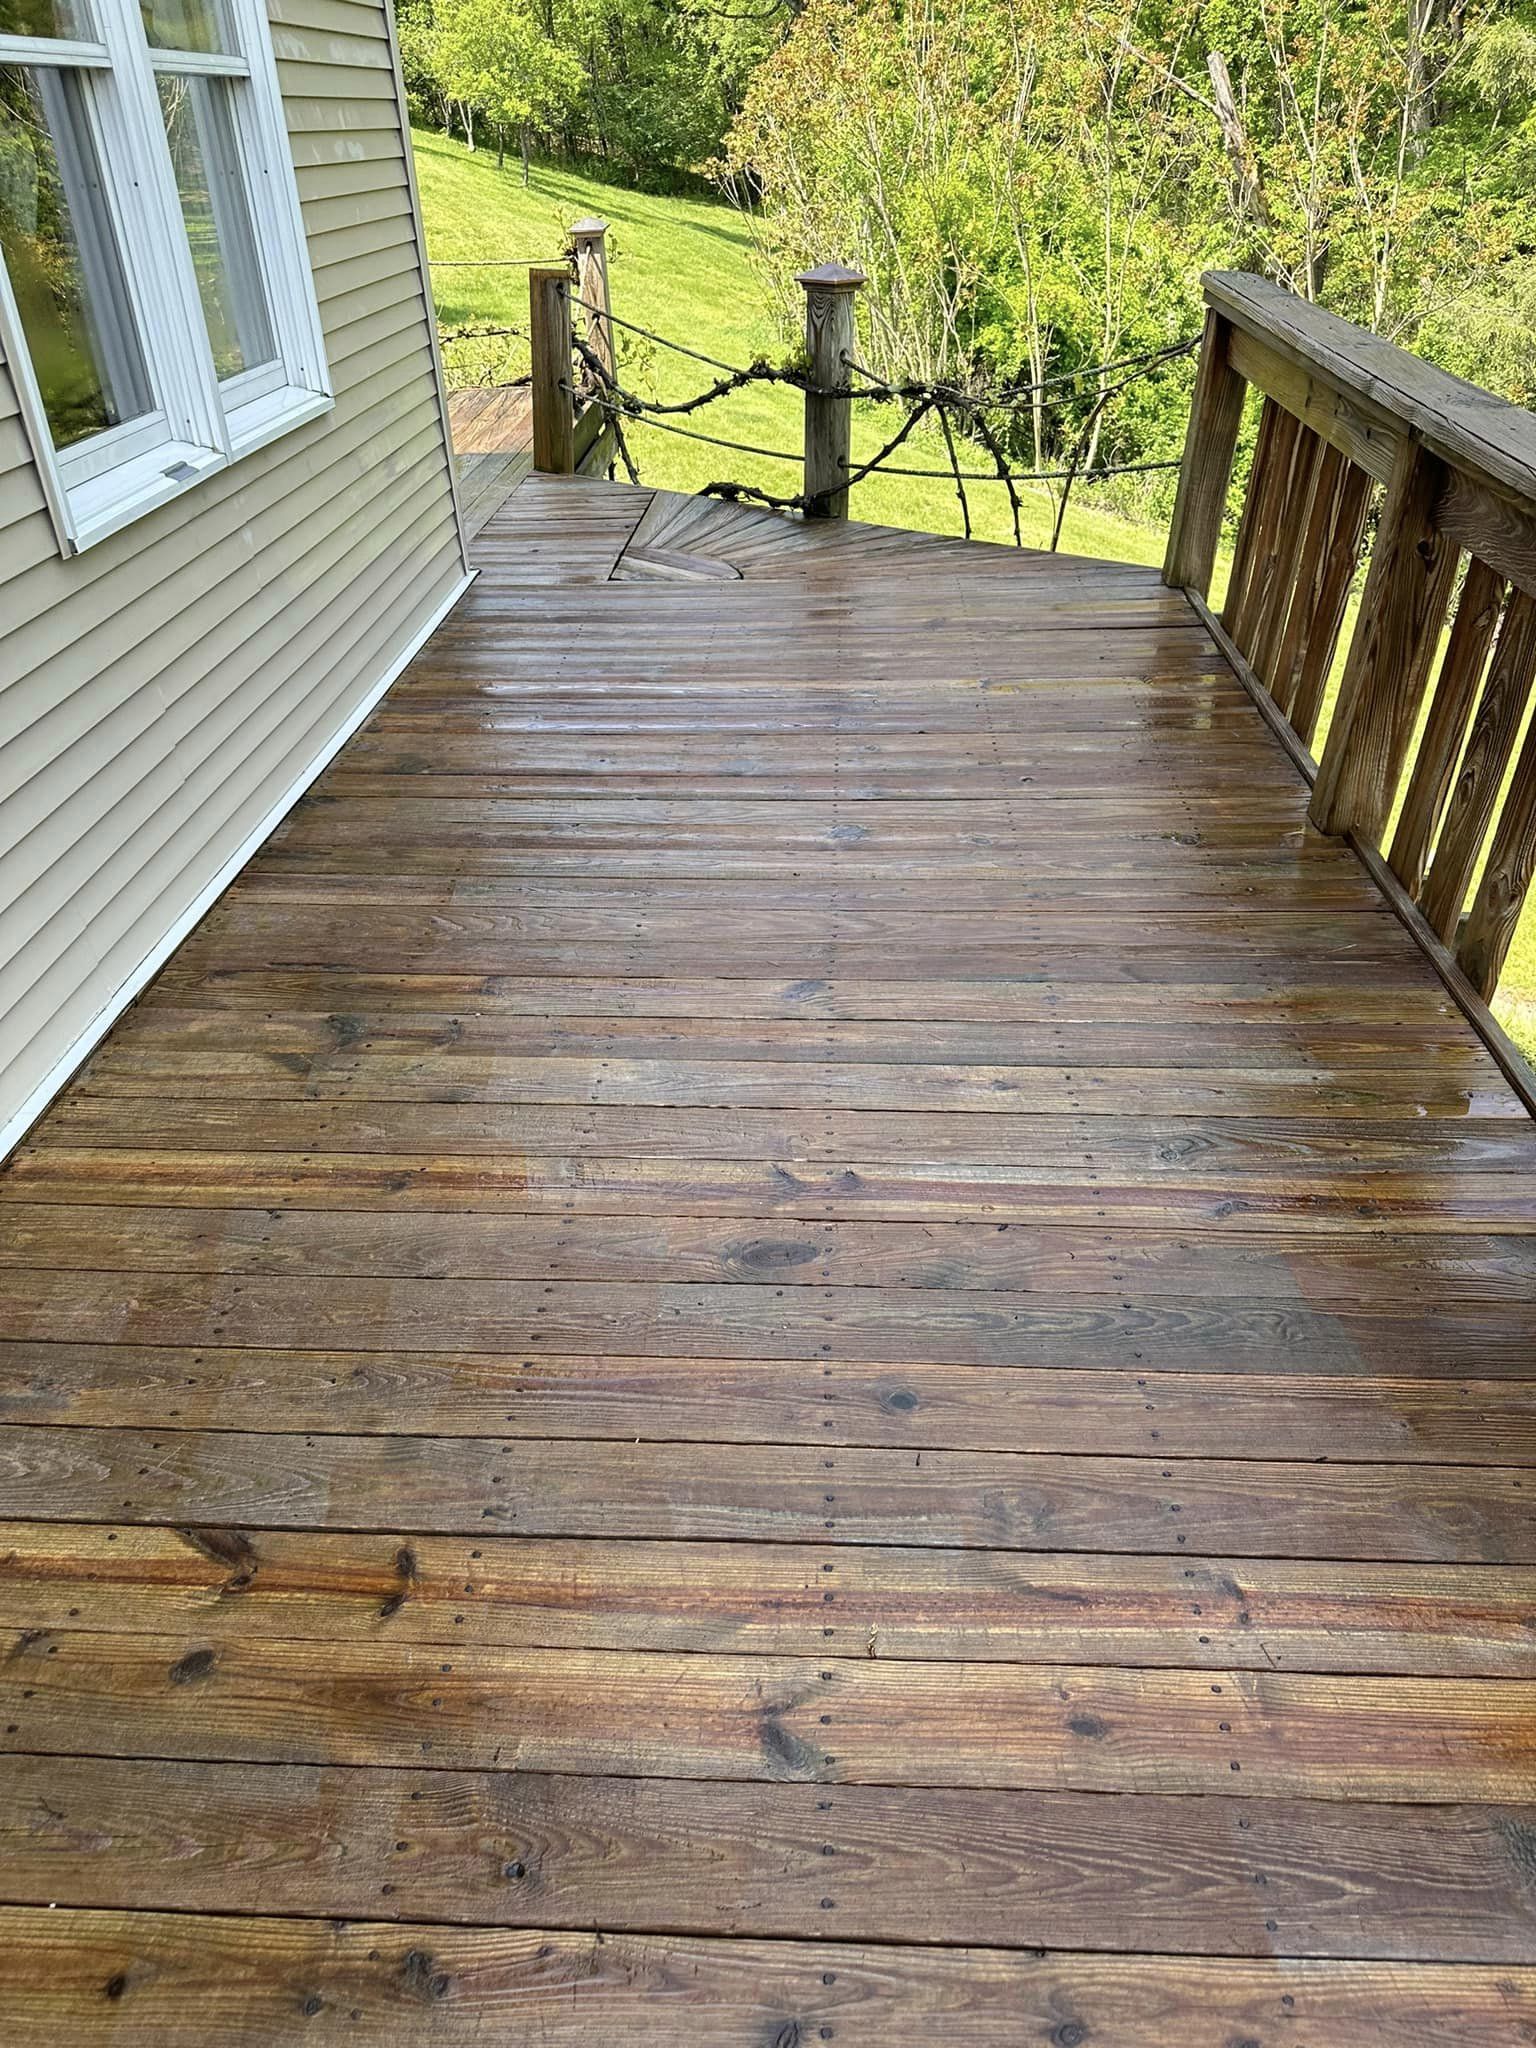 Expert pressure washing services for fence and deck cleaning in Bloomsburg PA by NextGen Power Wash LLC